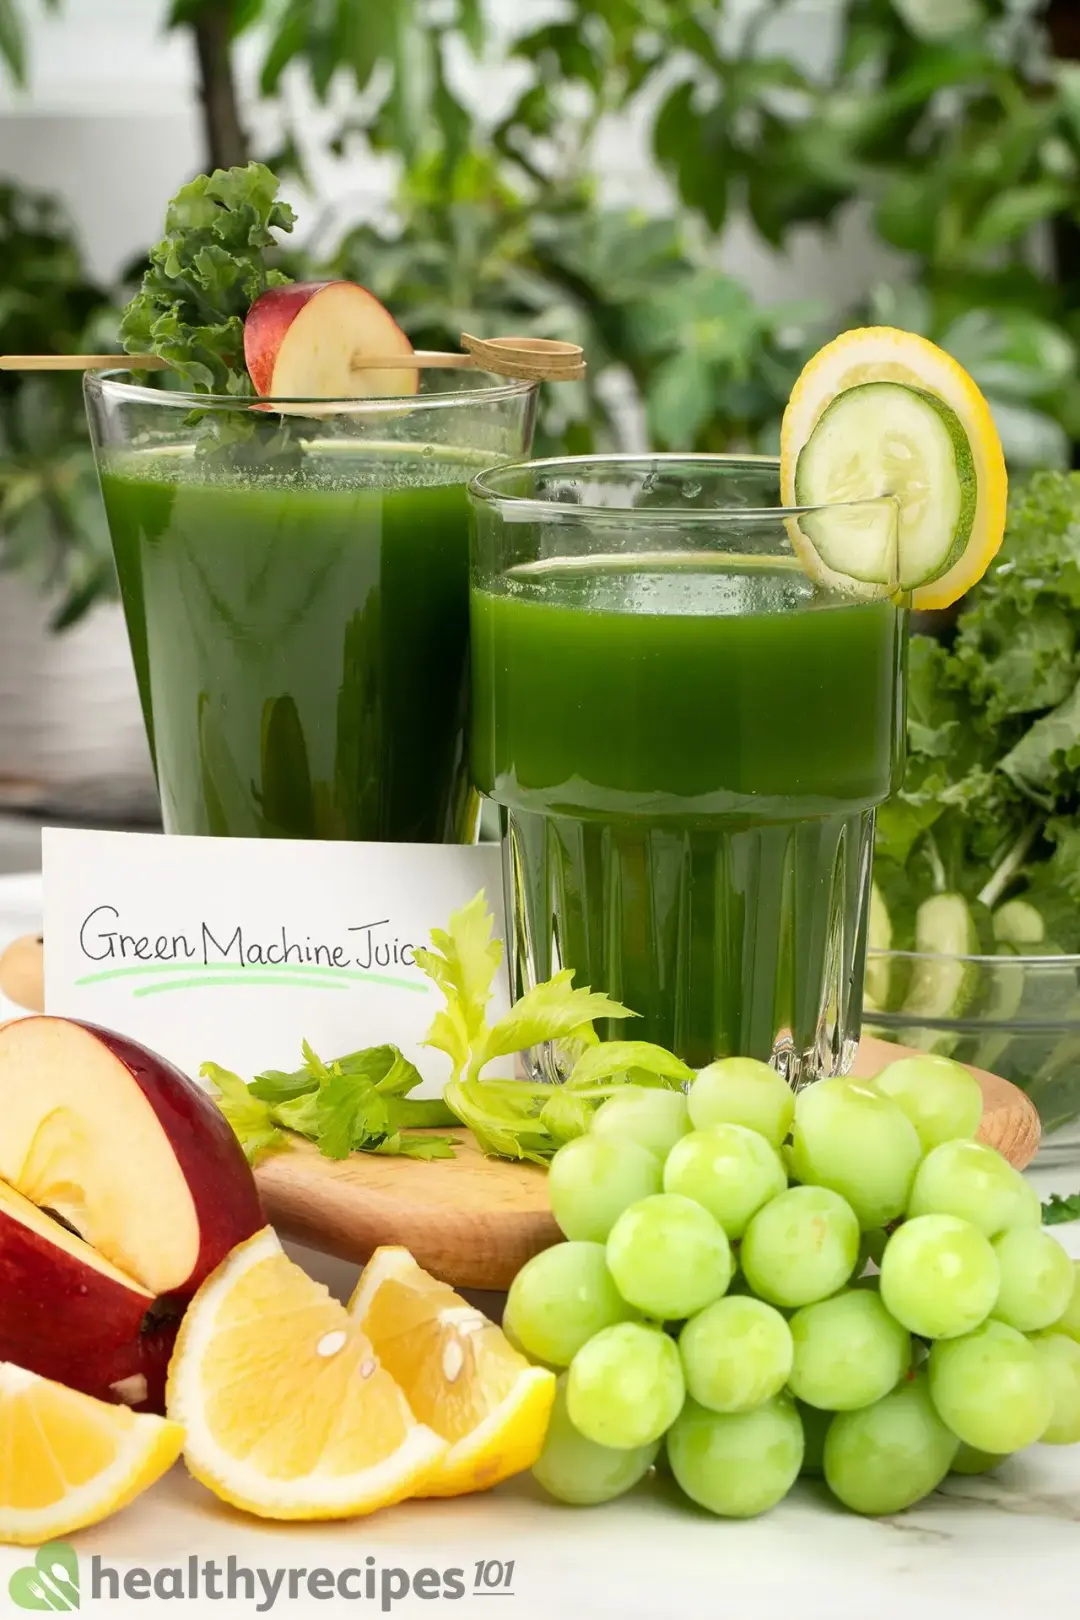 Two glasses of green machine juice with a note on the side placed on a wooden board, with one decorated with kale leaves and a slice of apple, and another decorated with a cucumber slice and a lemon slice